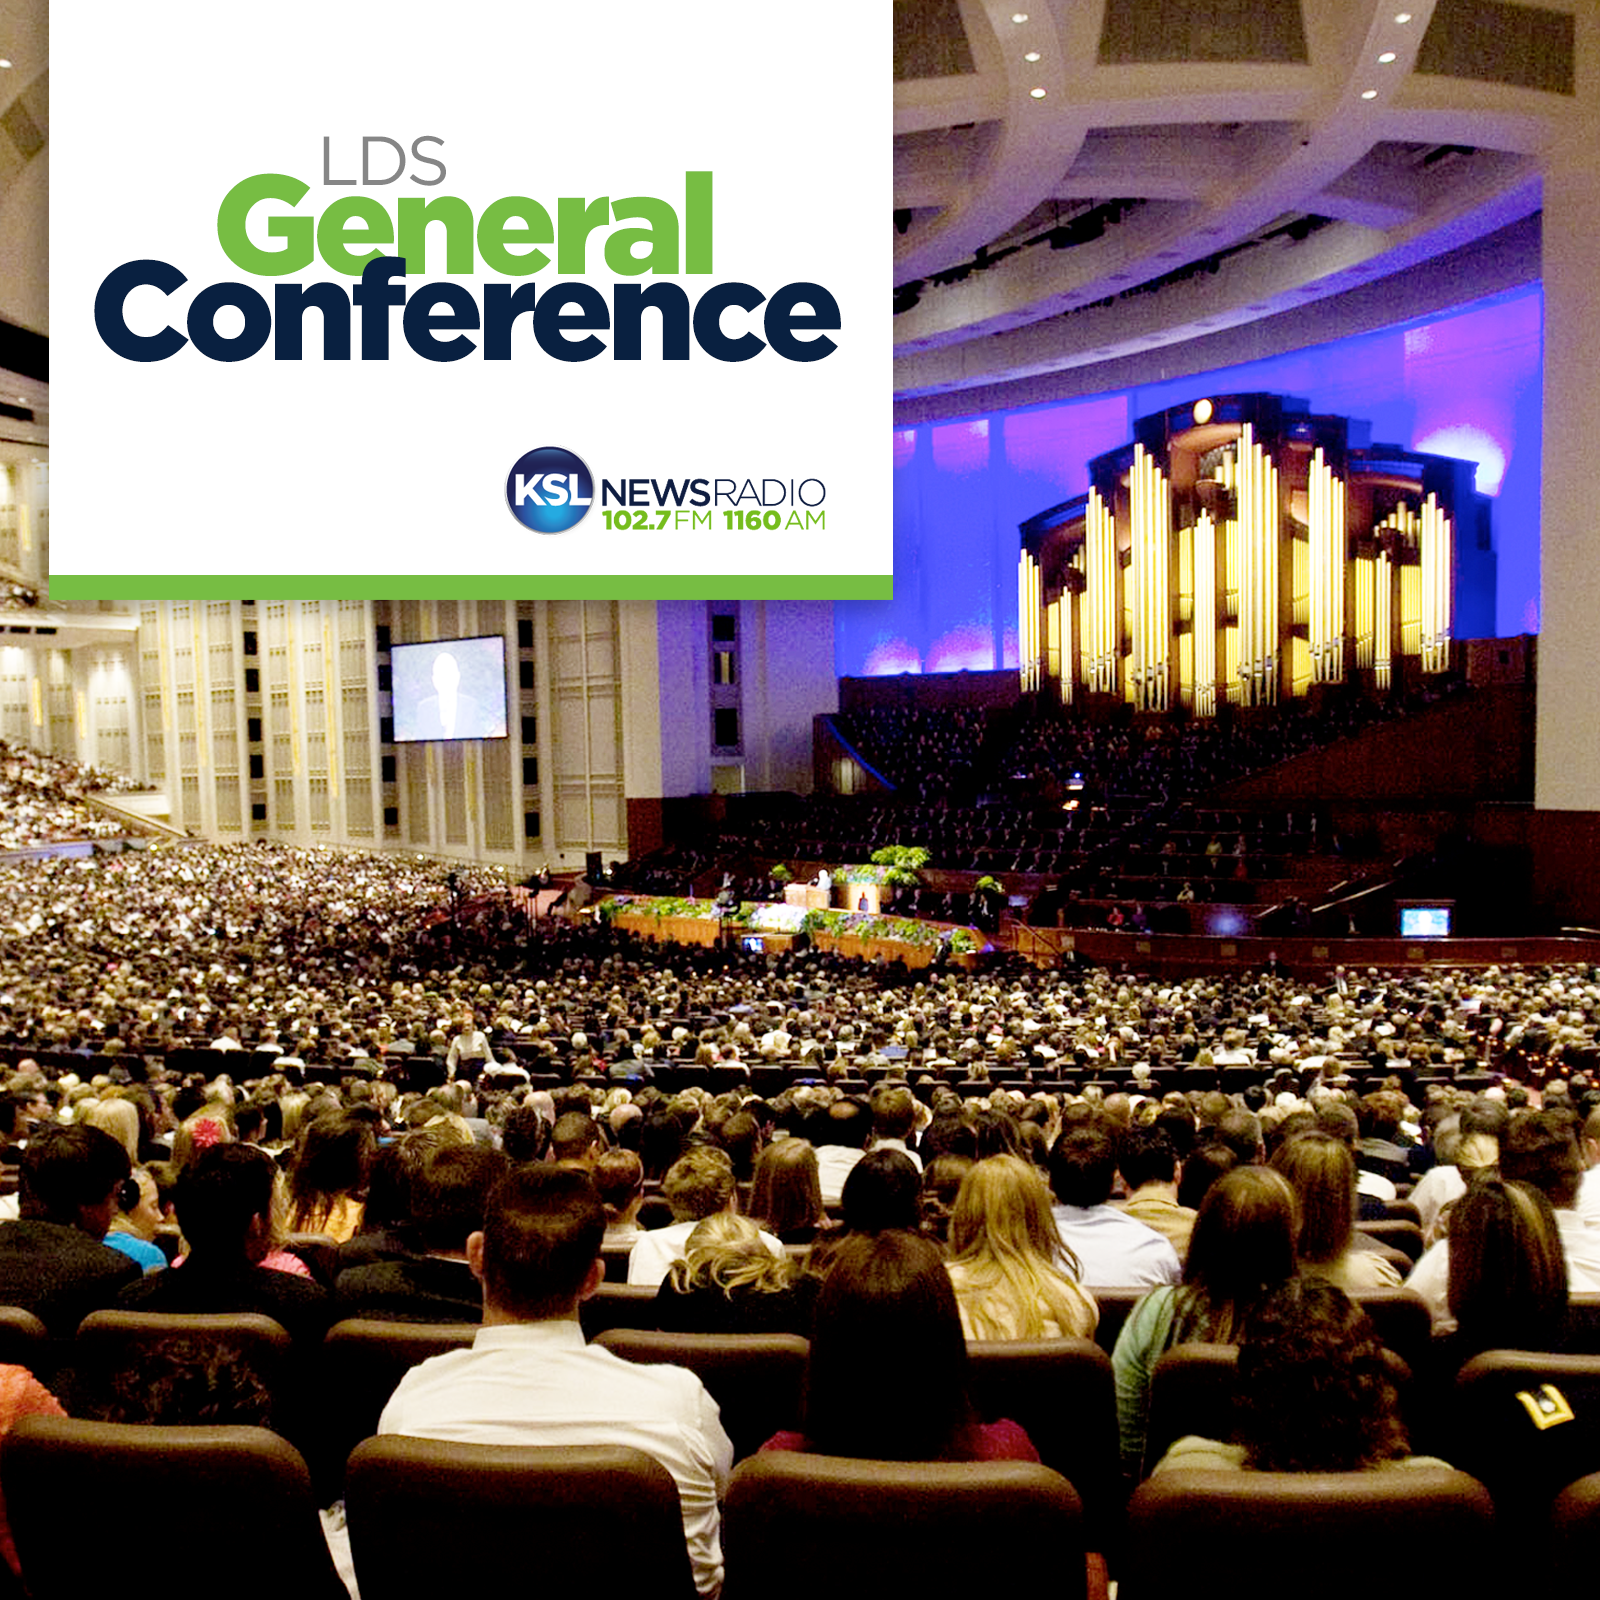  Sunday Morning Session of The 188th LDS General Conference, April 1, 2018